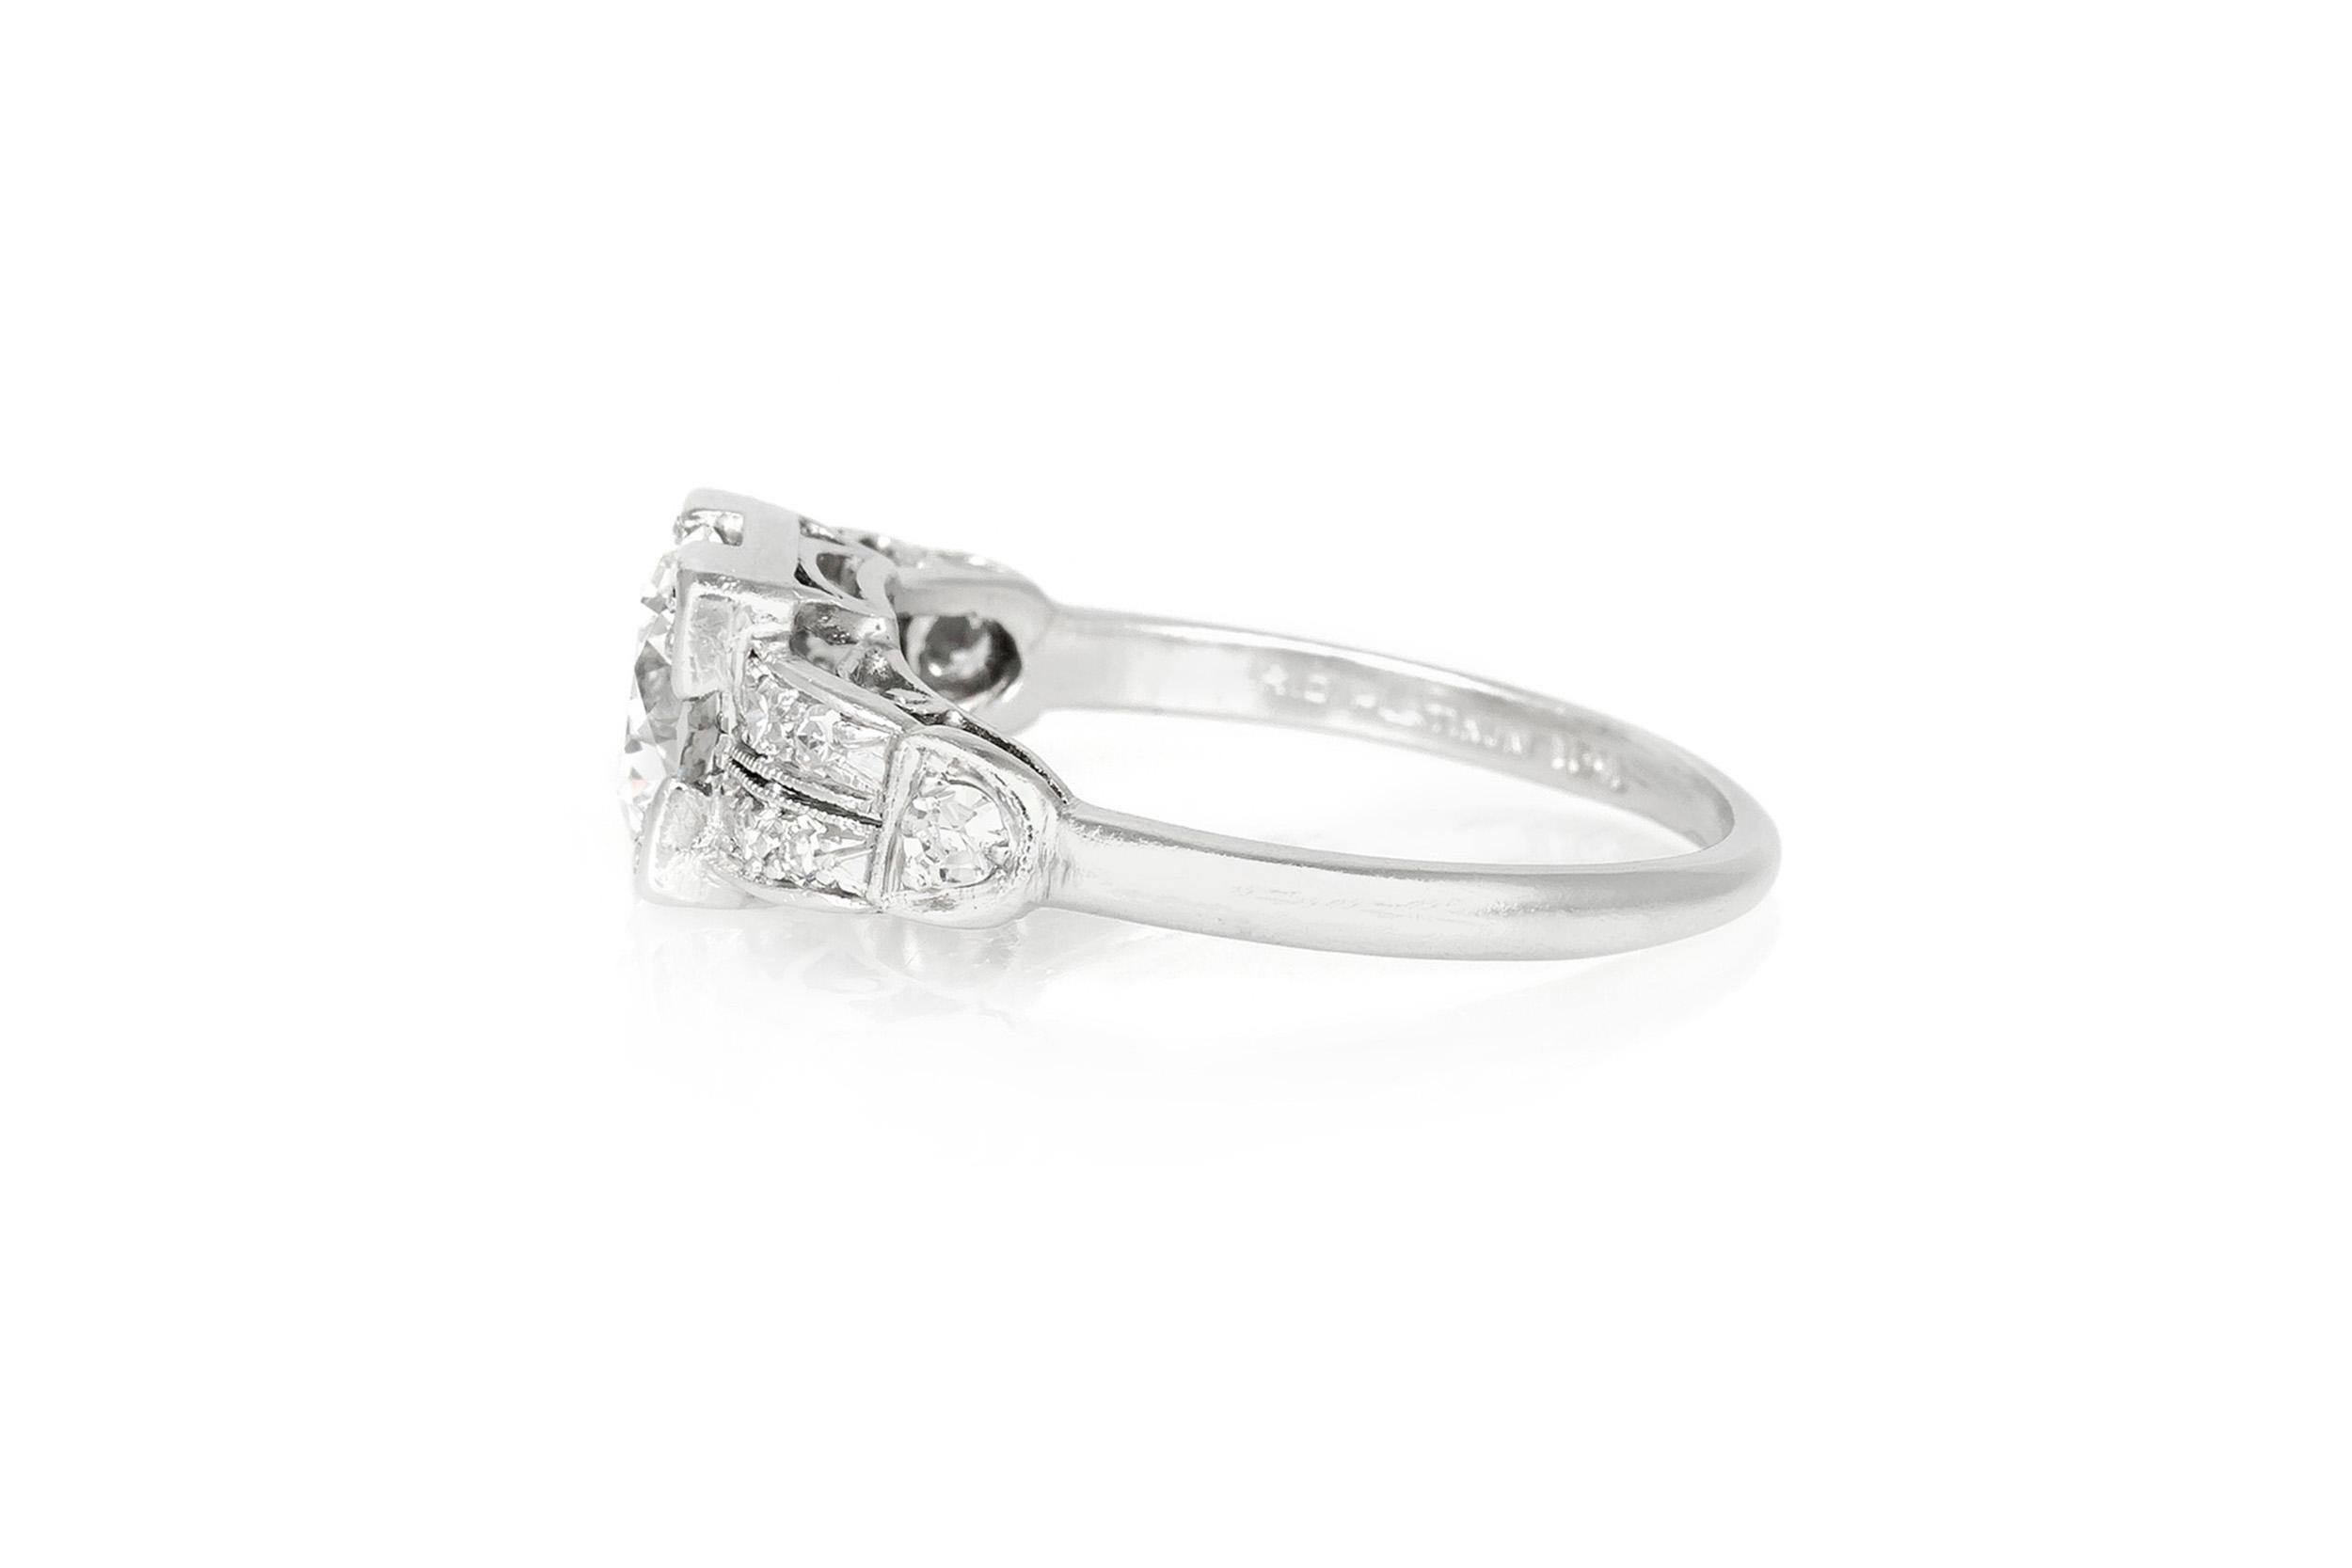 1920s-1930s Platinum Filigree 1.10 Carat Center Diamond Engagement Ring In Excellent Condition For Sale In New York, NY